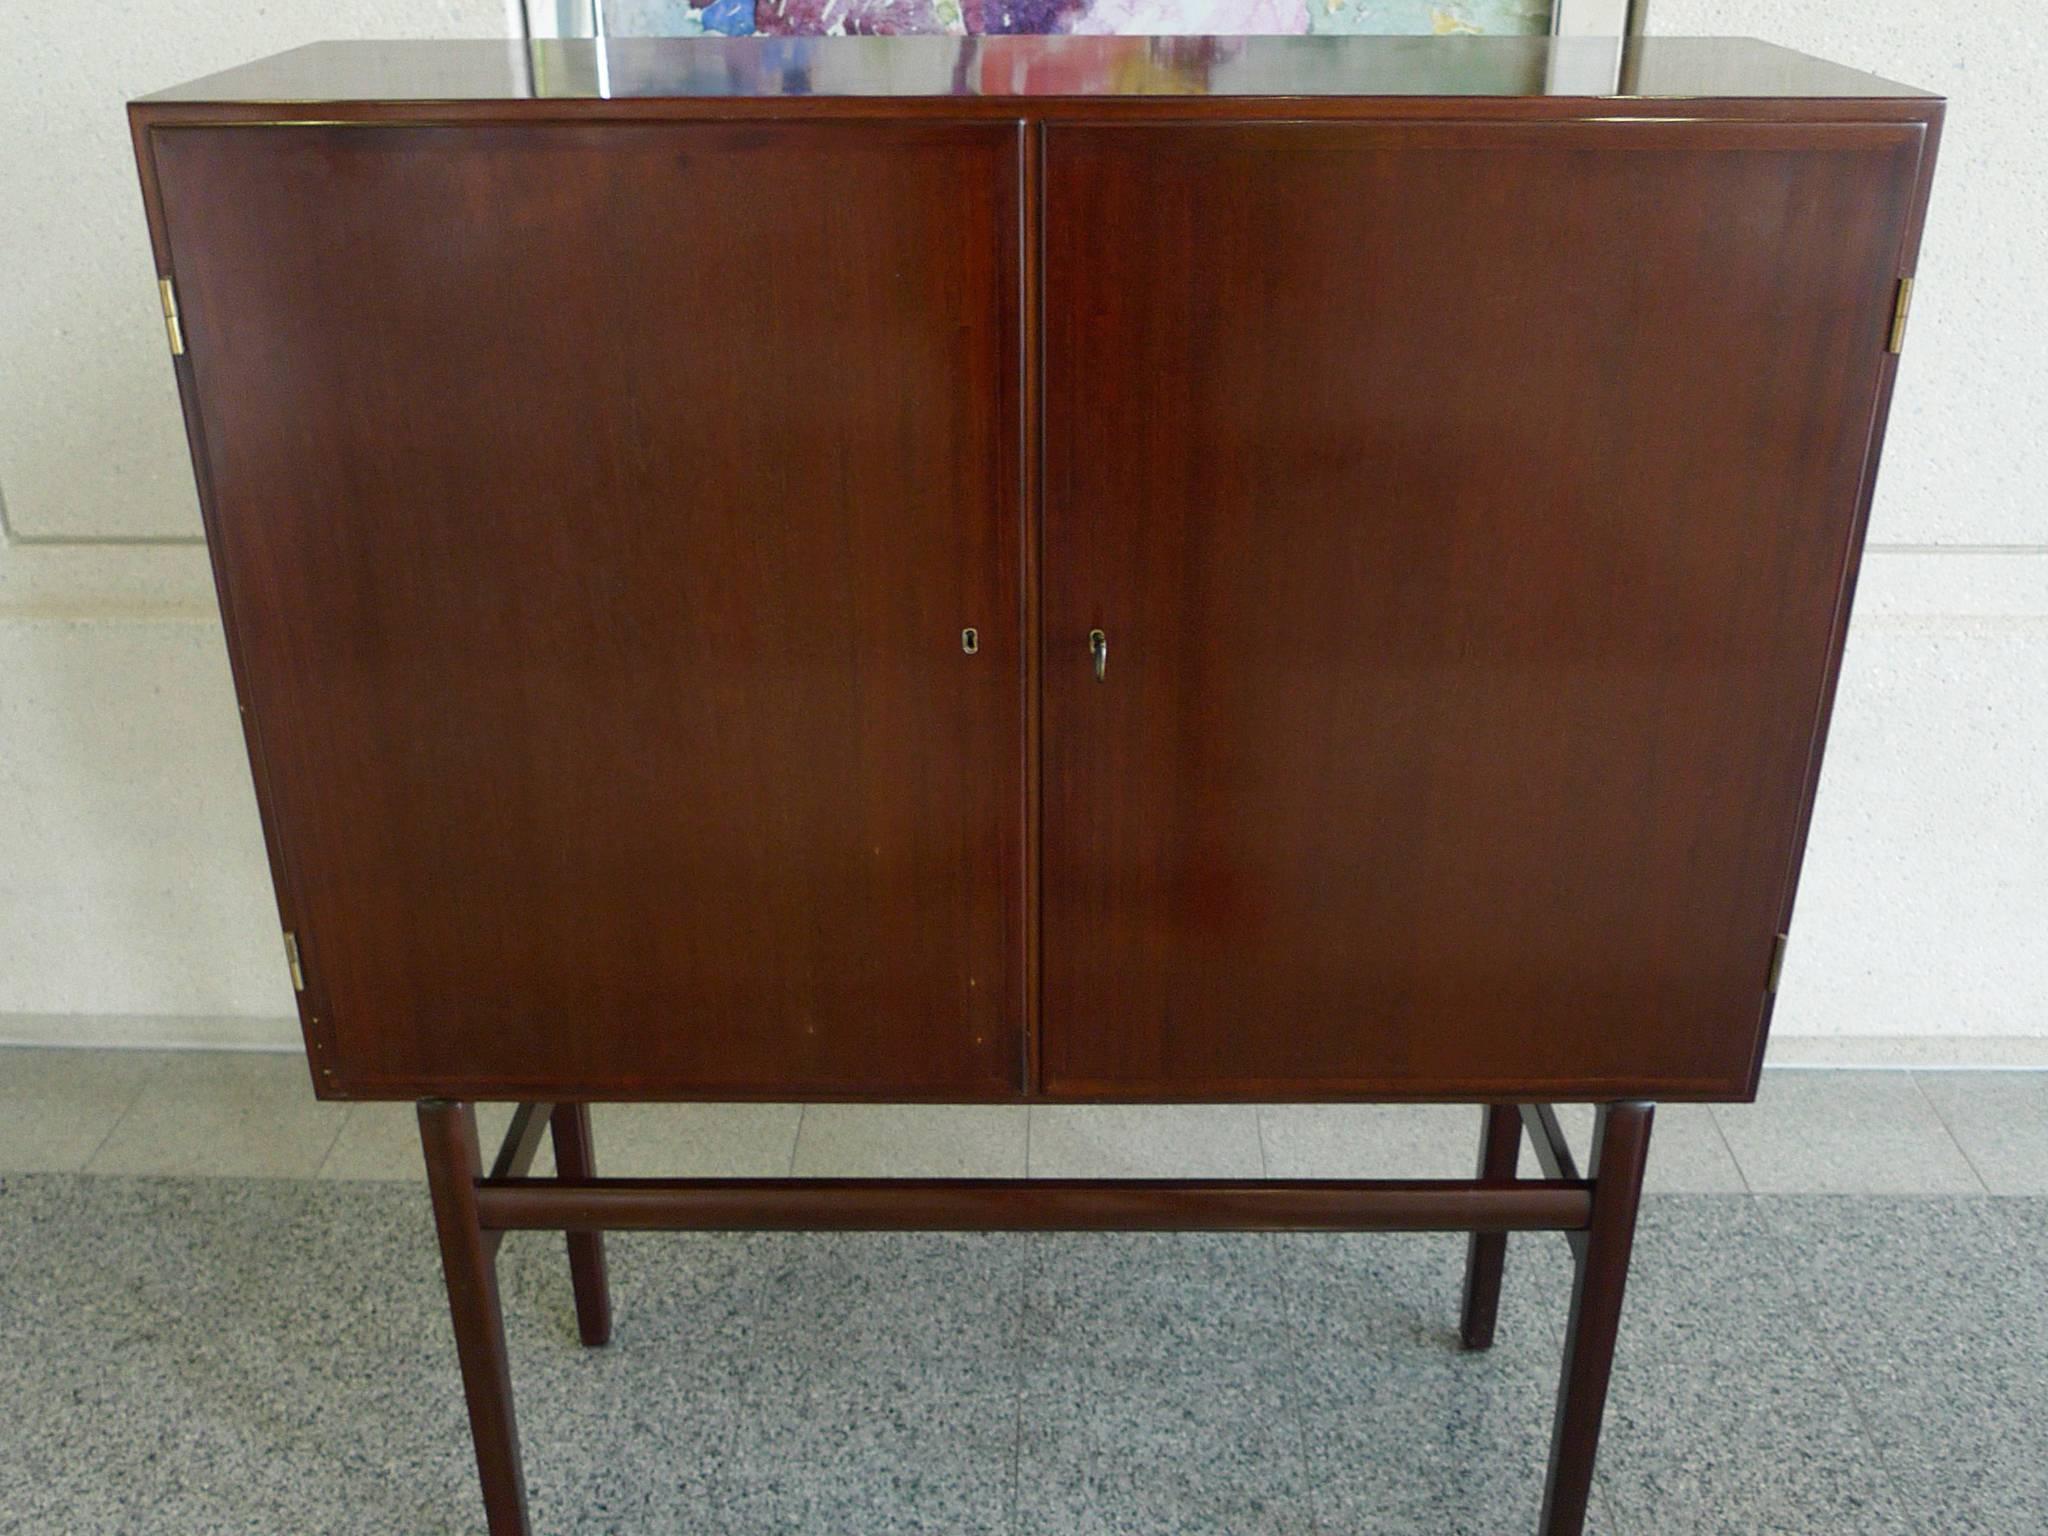 1960s Danish Rungstedlund Mahogany Highboard by Ole Wanscher for Poul Jeppesen In Excellent Condition For Sale In New York, NY